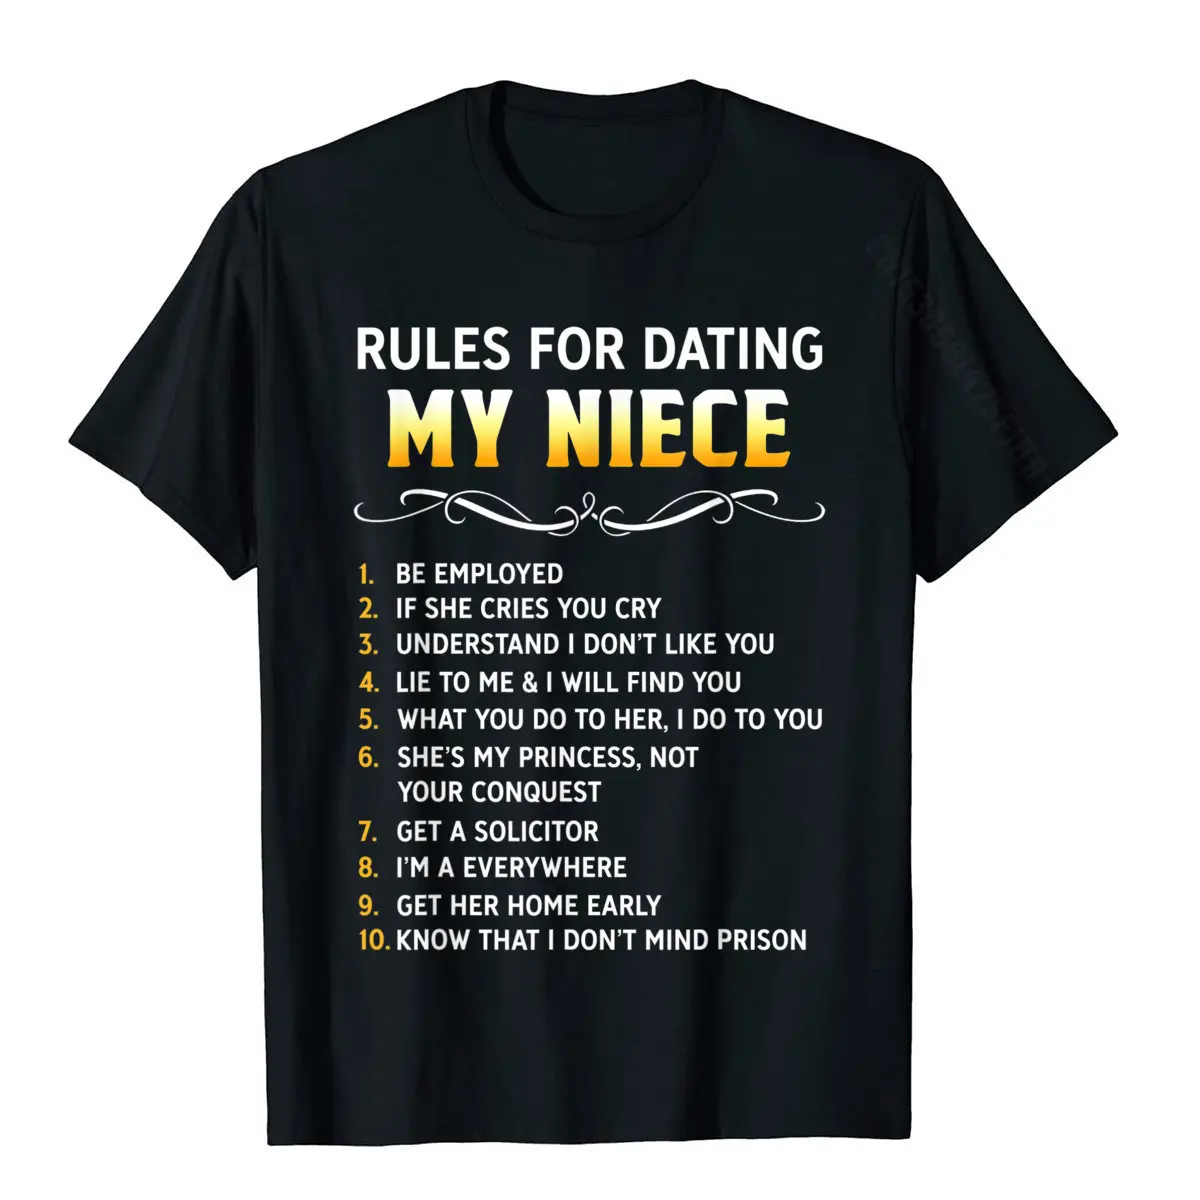 Rules For Dating My Niece T-Shirt Cotton Mens T Shirt Printed Tops & Tees Discount Europe